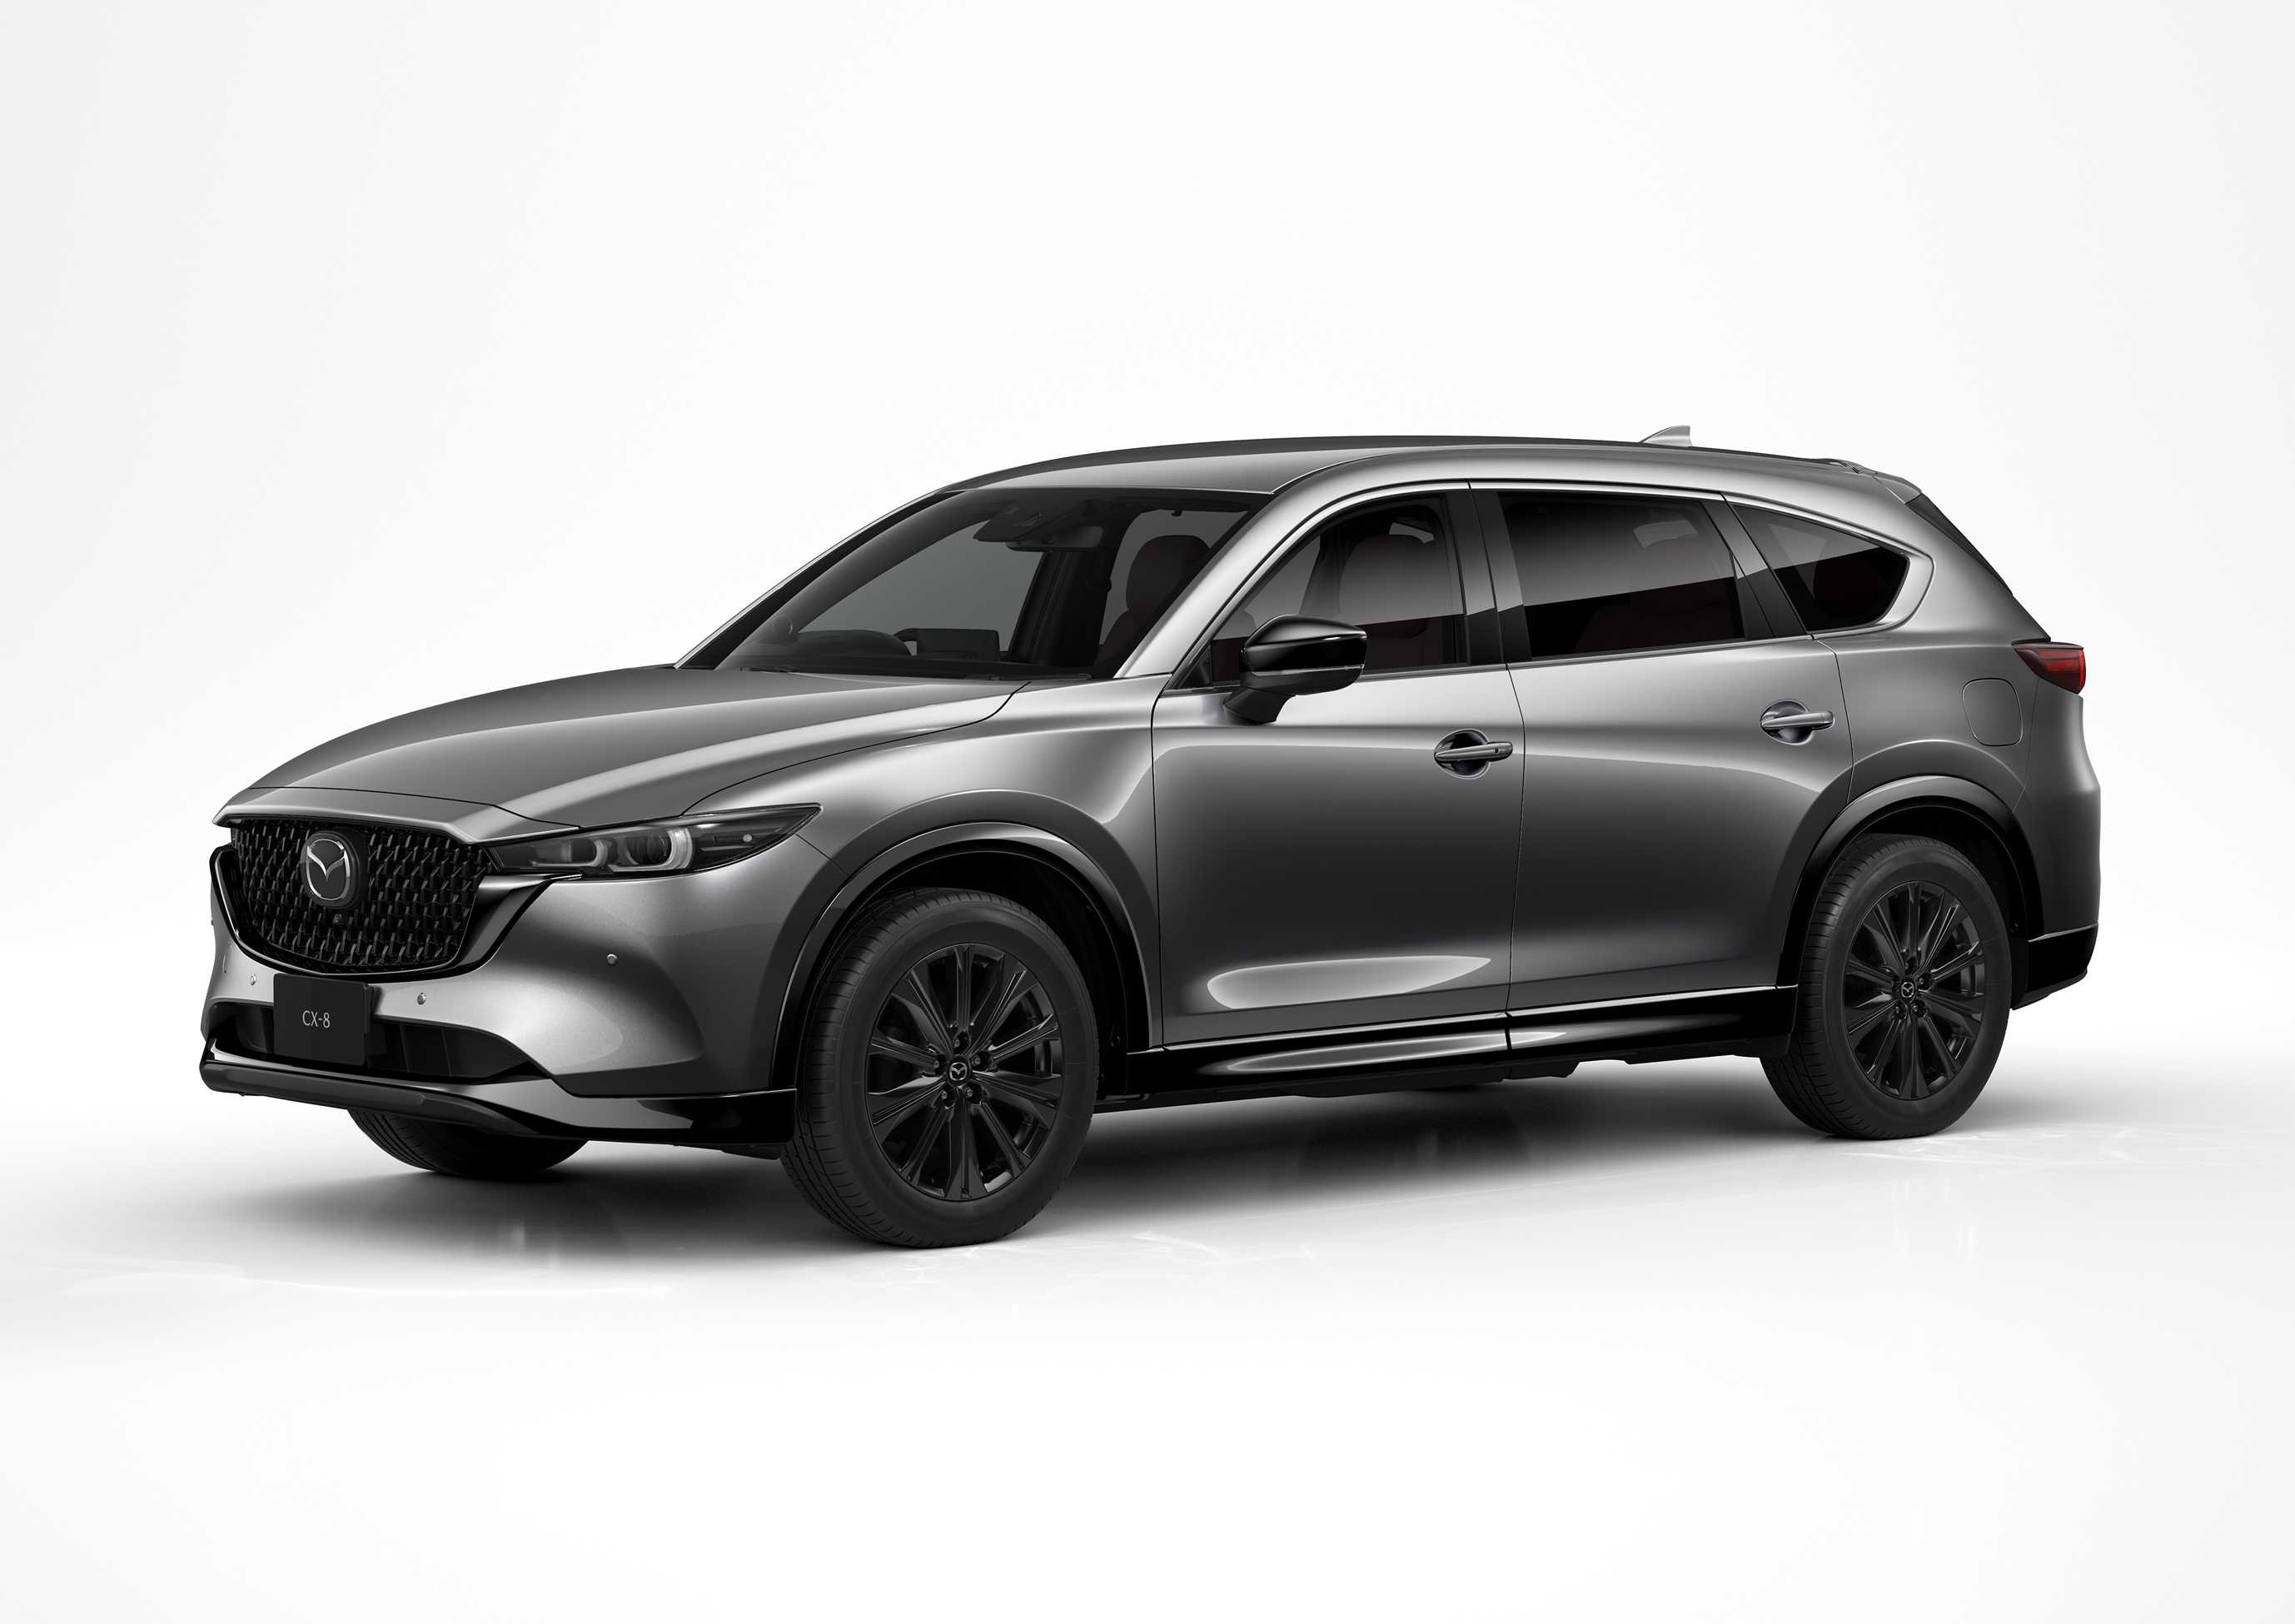 Fichiers Tuning Haute Qualité Mazda CX-8 2.2 Skyactiv-D (2022 and more) 200hp